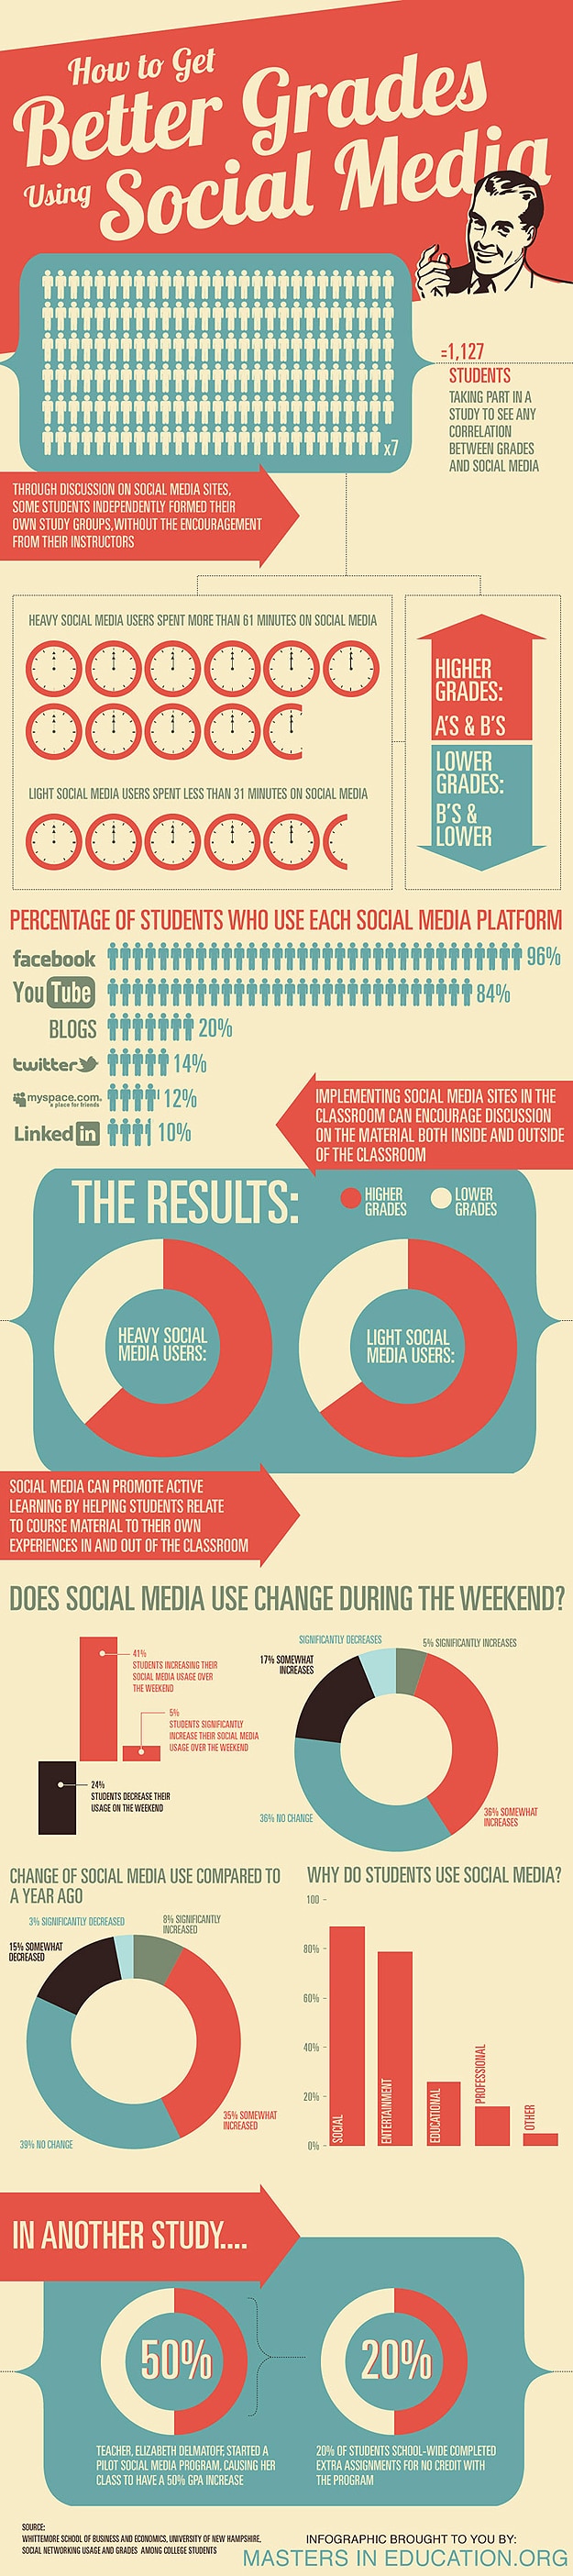 How Social Media Can Improve Student Grades [Infographic]